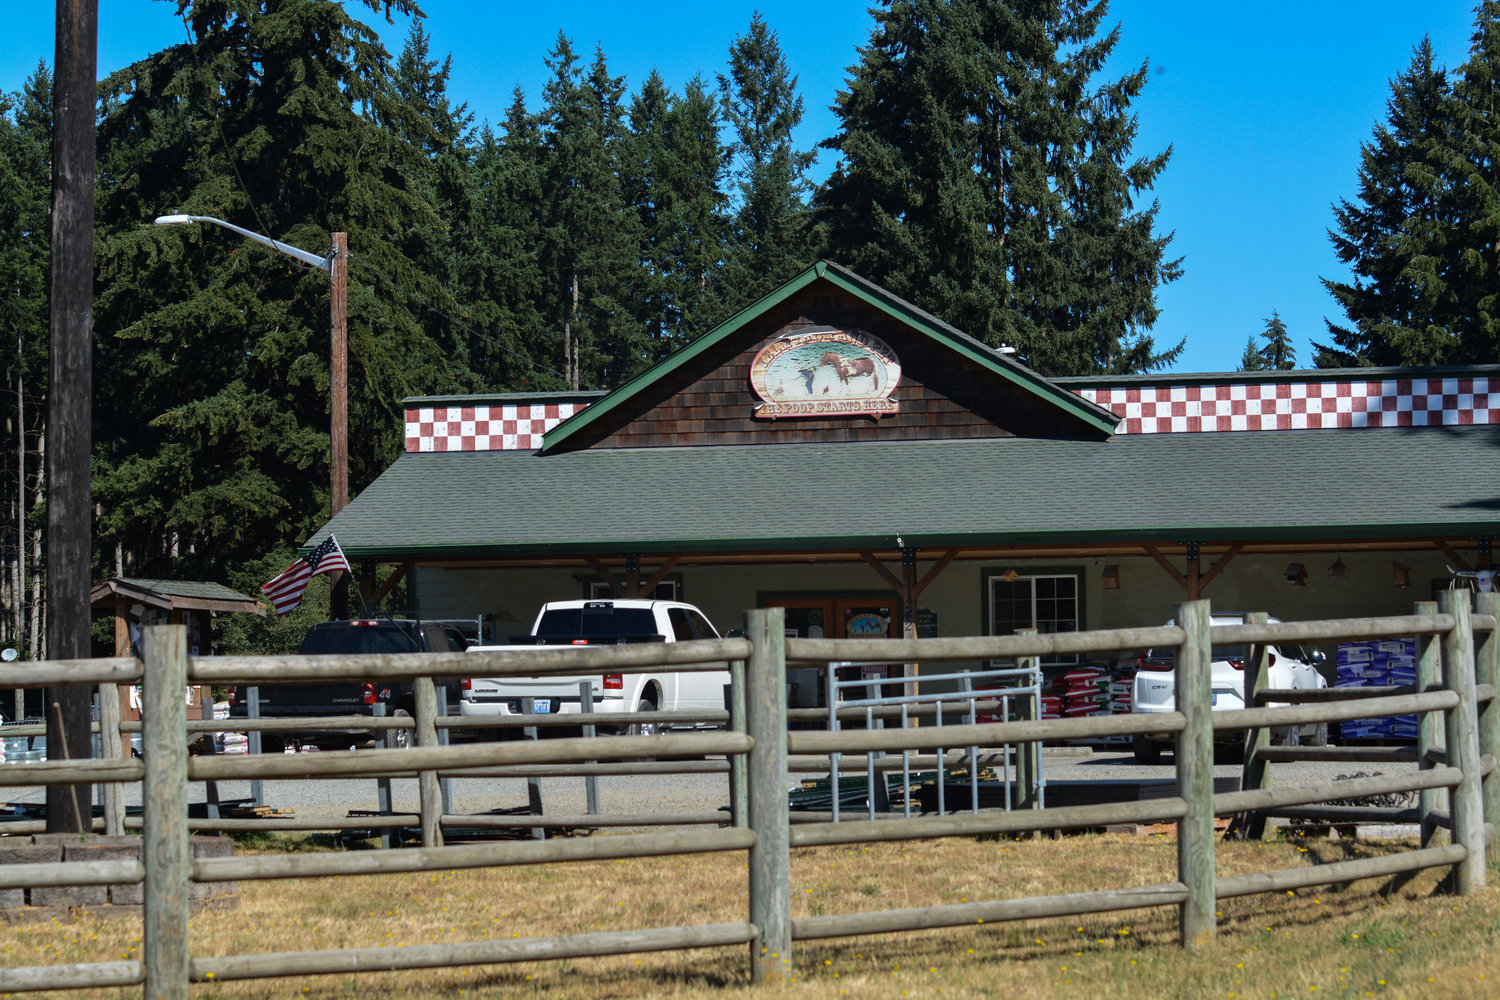 Yelm Farm and Pet is located at 11242 Bald Hill Rd SE.